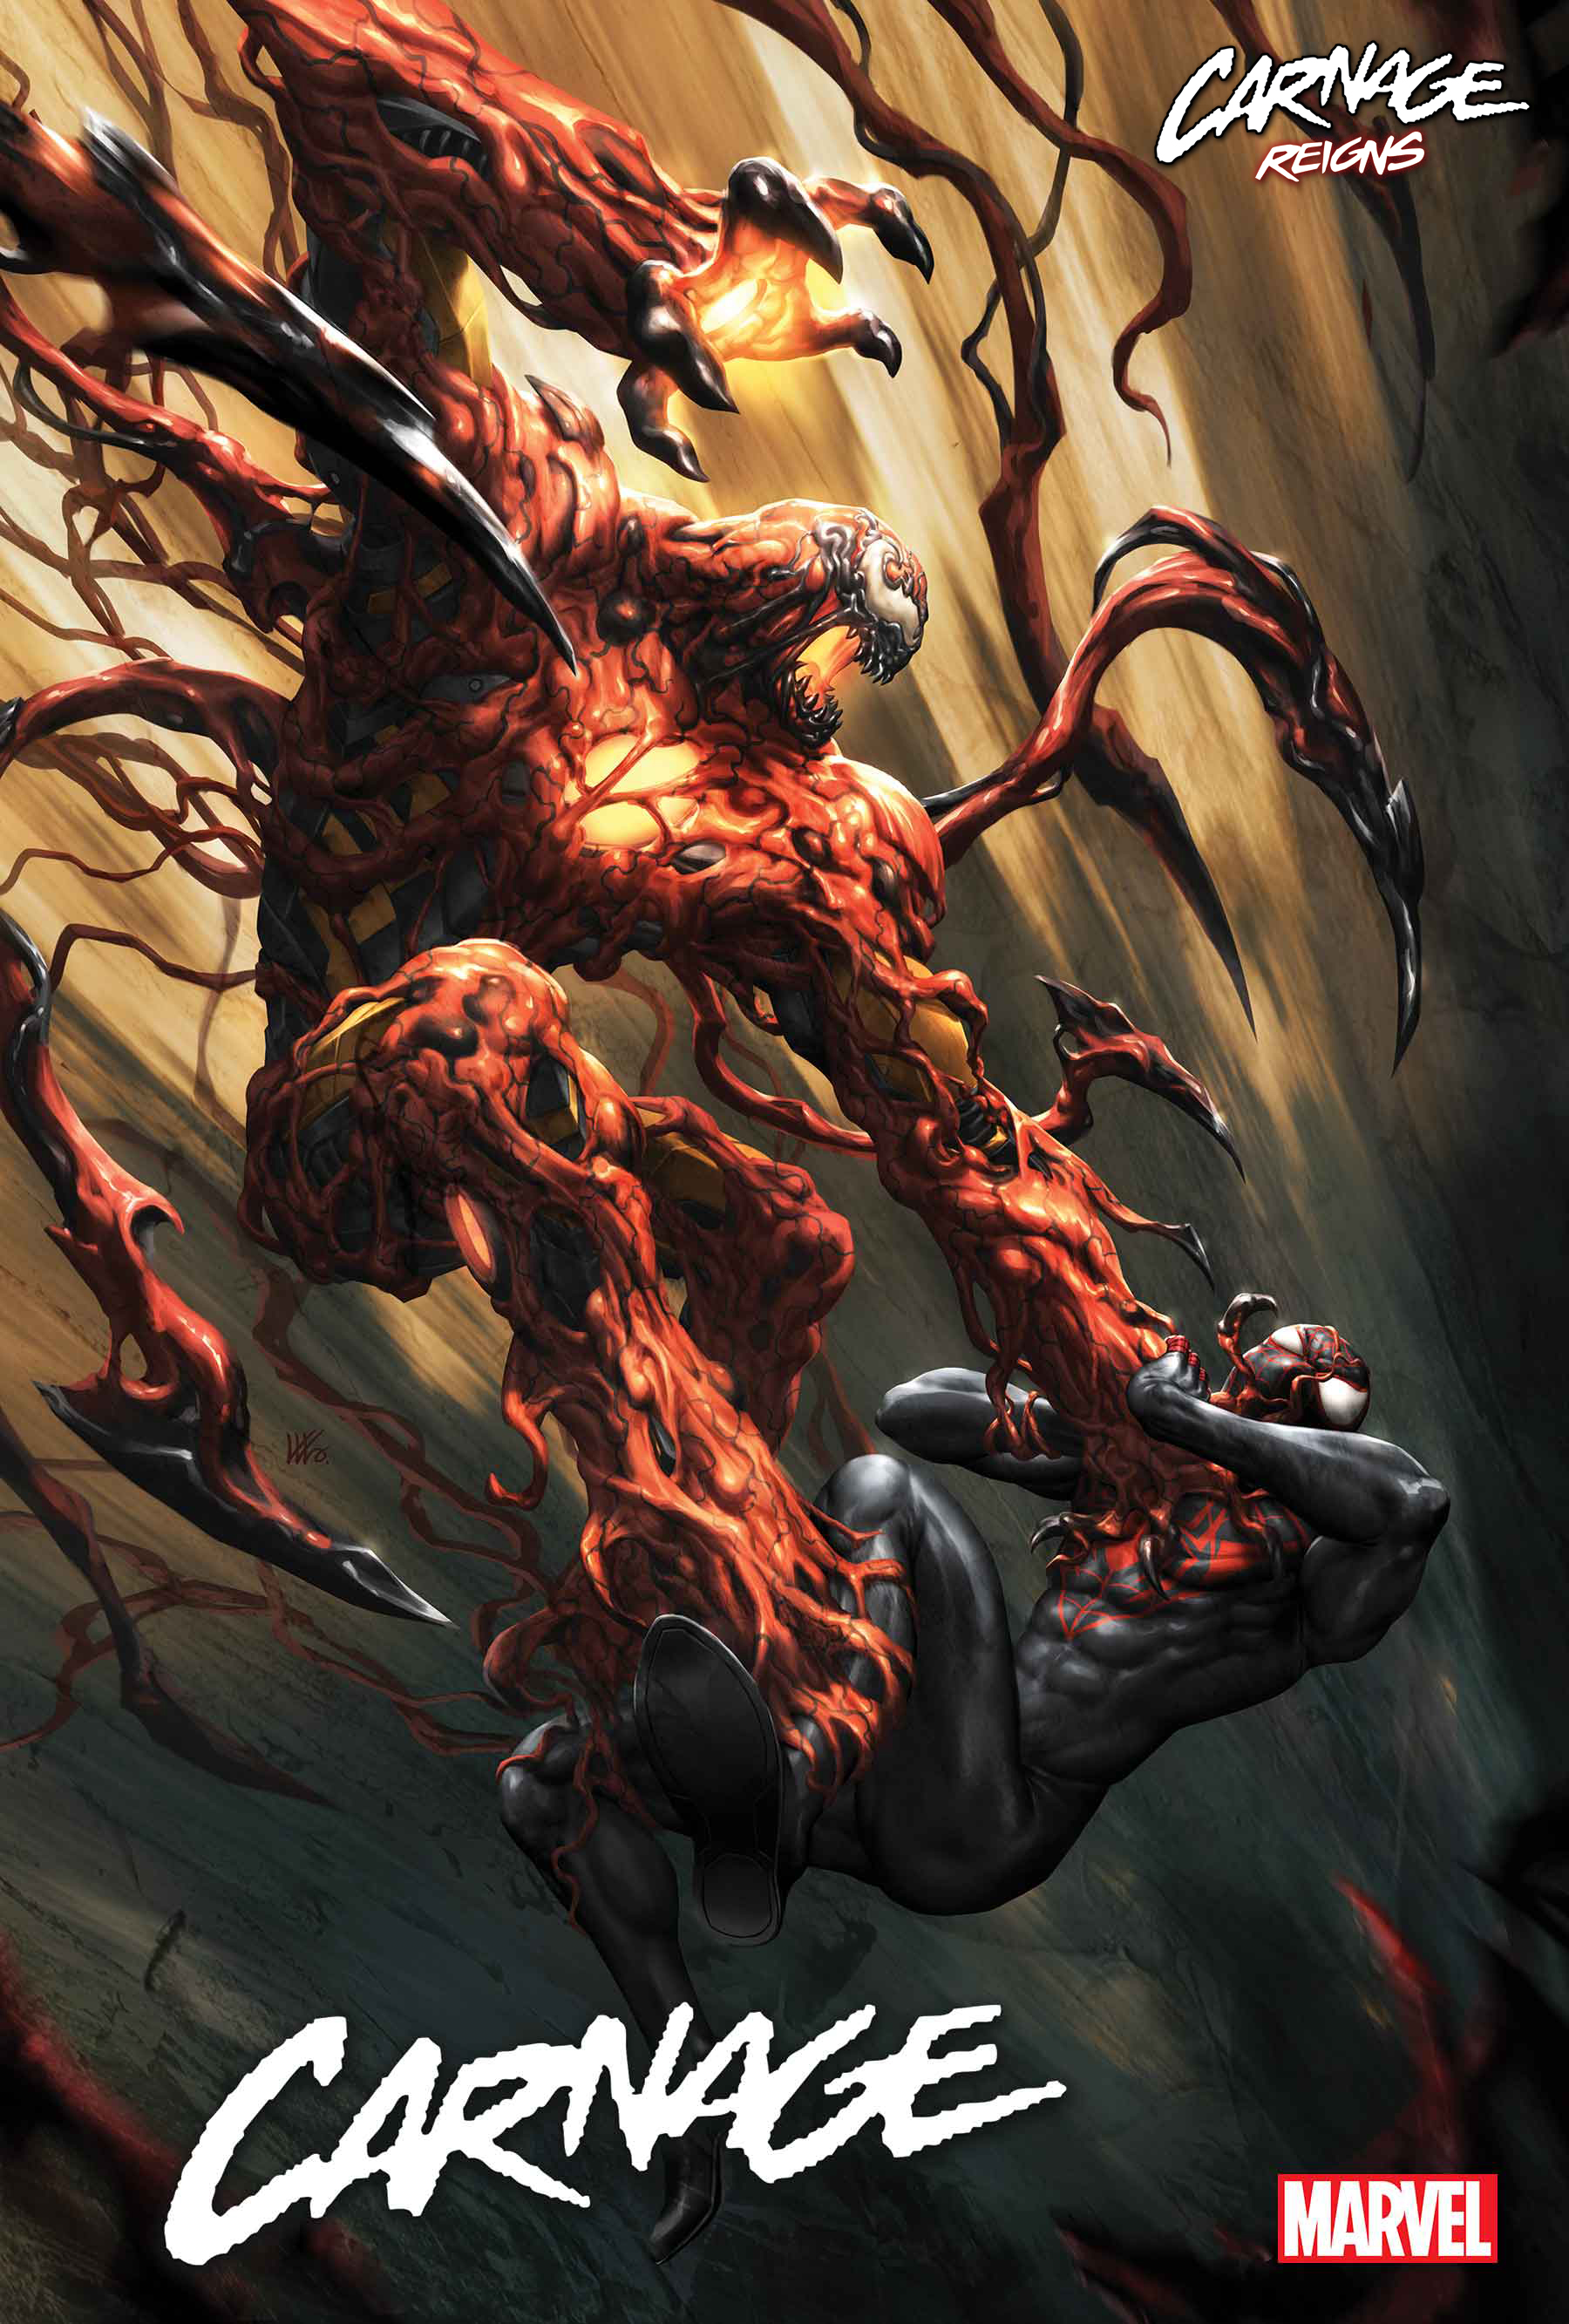 CARNAGE #13 - “CARNAGE REIGNS” PART 3! cover